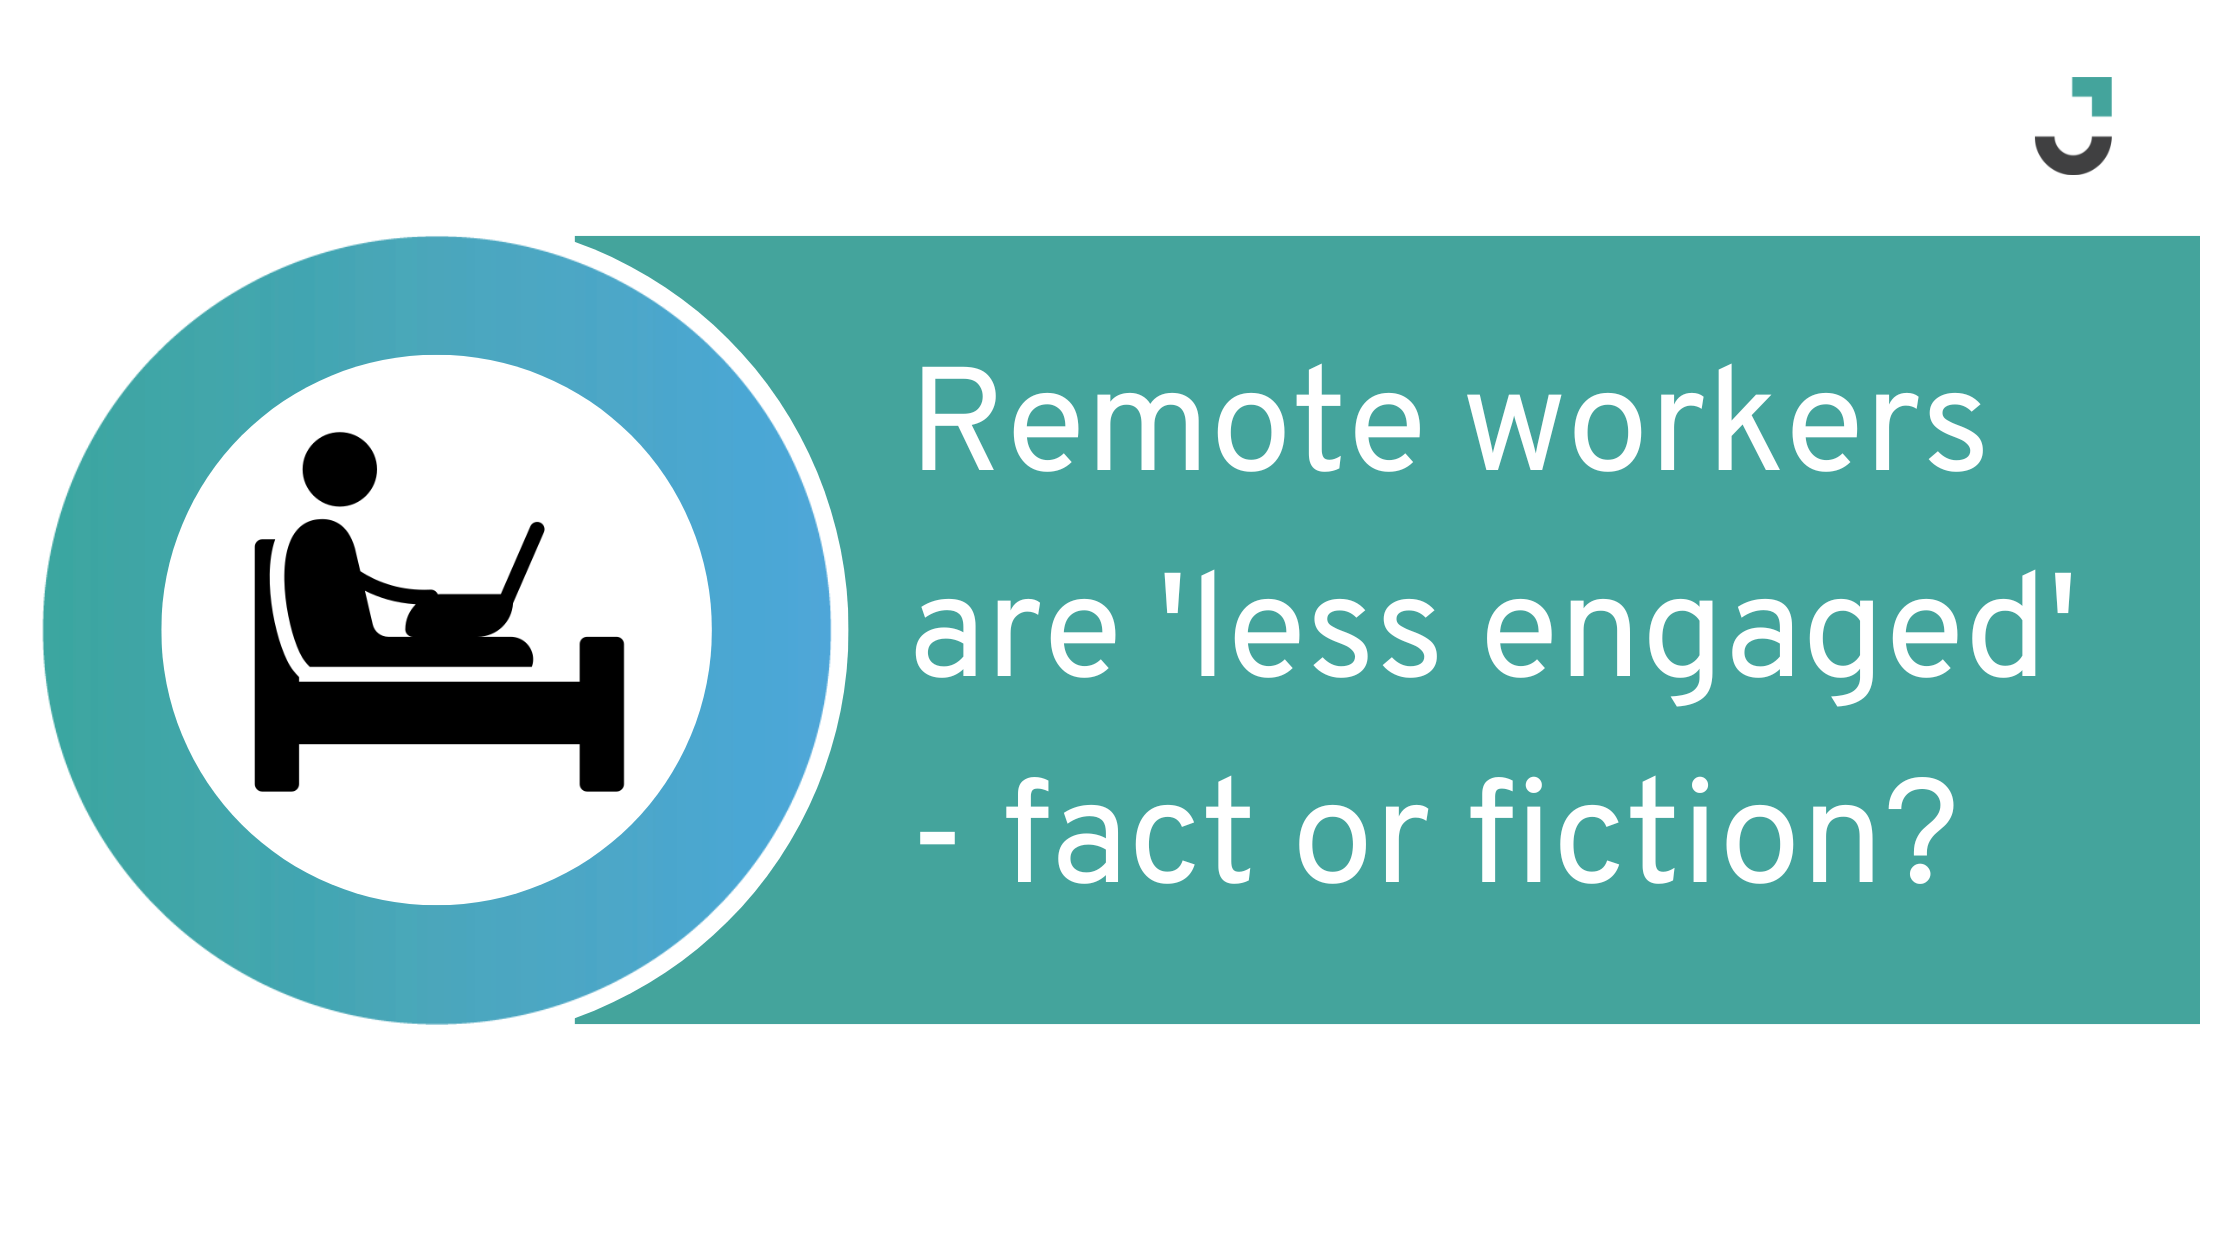 Remote workers are 'less engaged' - fact or fiction?